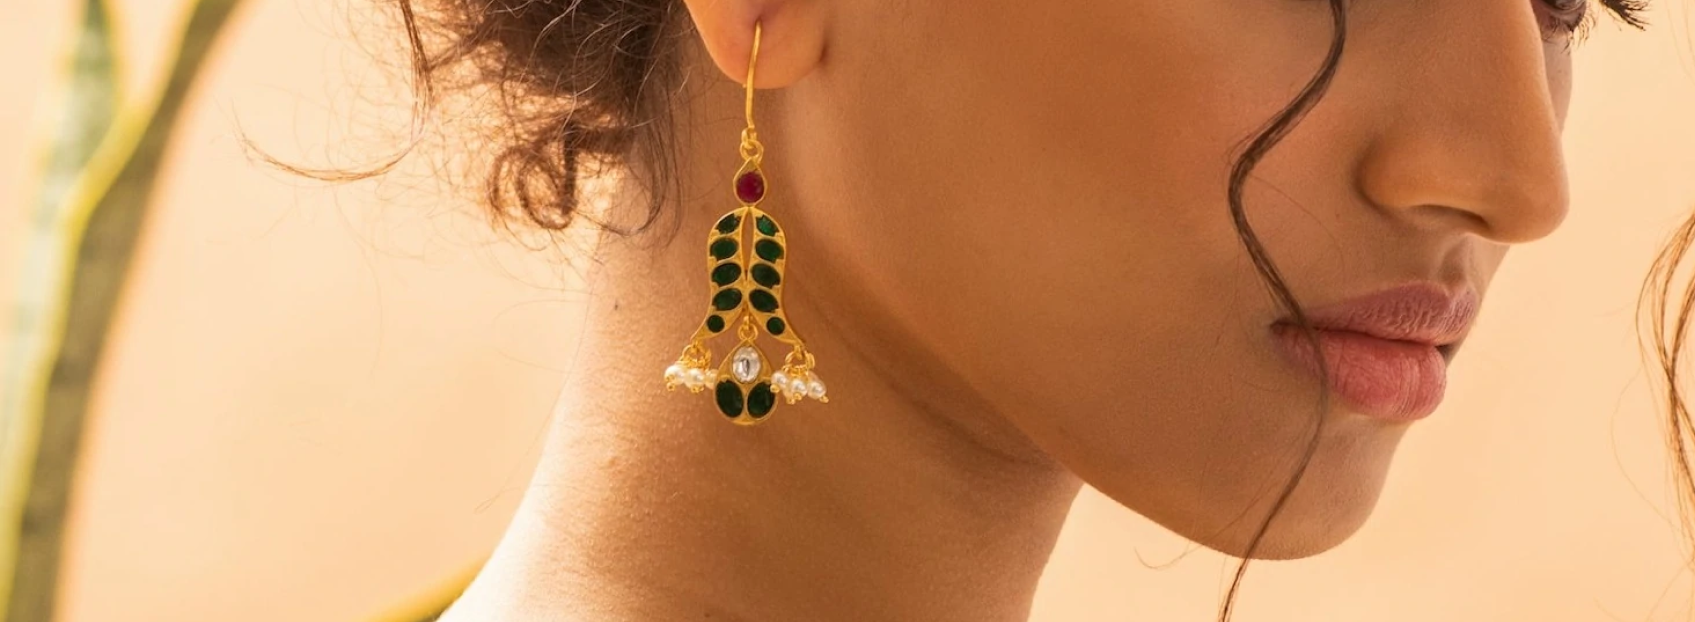 model wearing dangling bee earrings with diamond and ruby gems